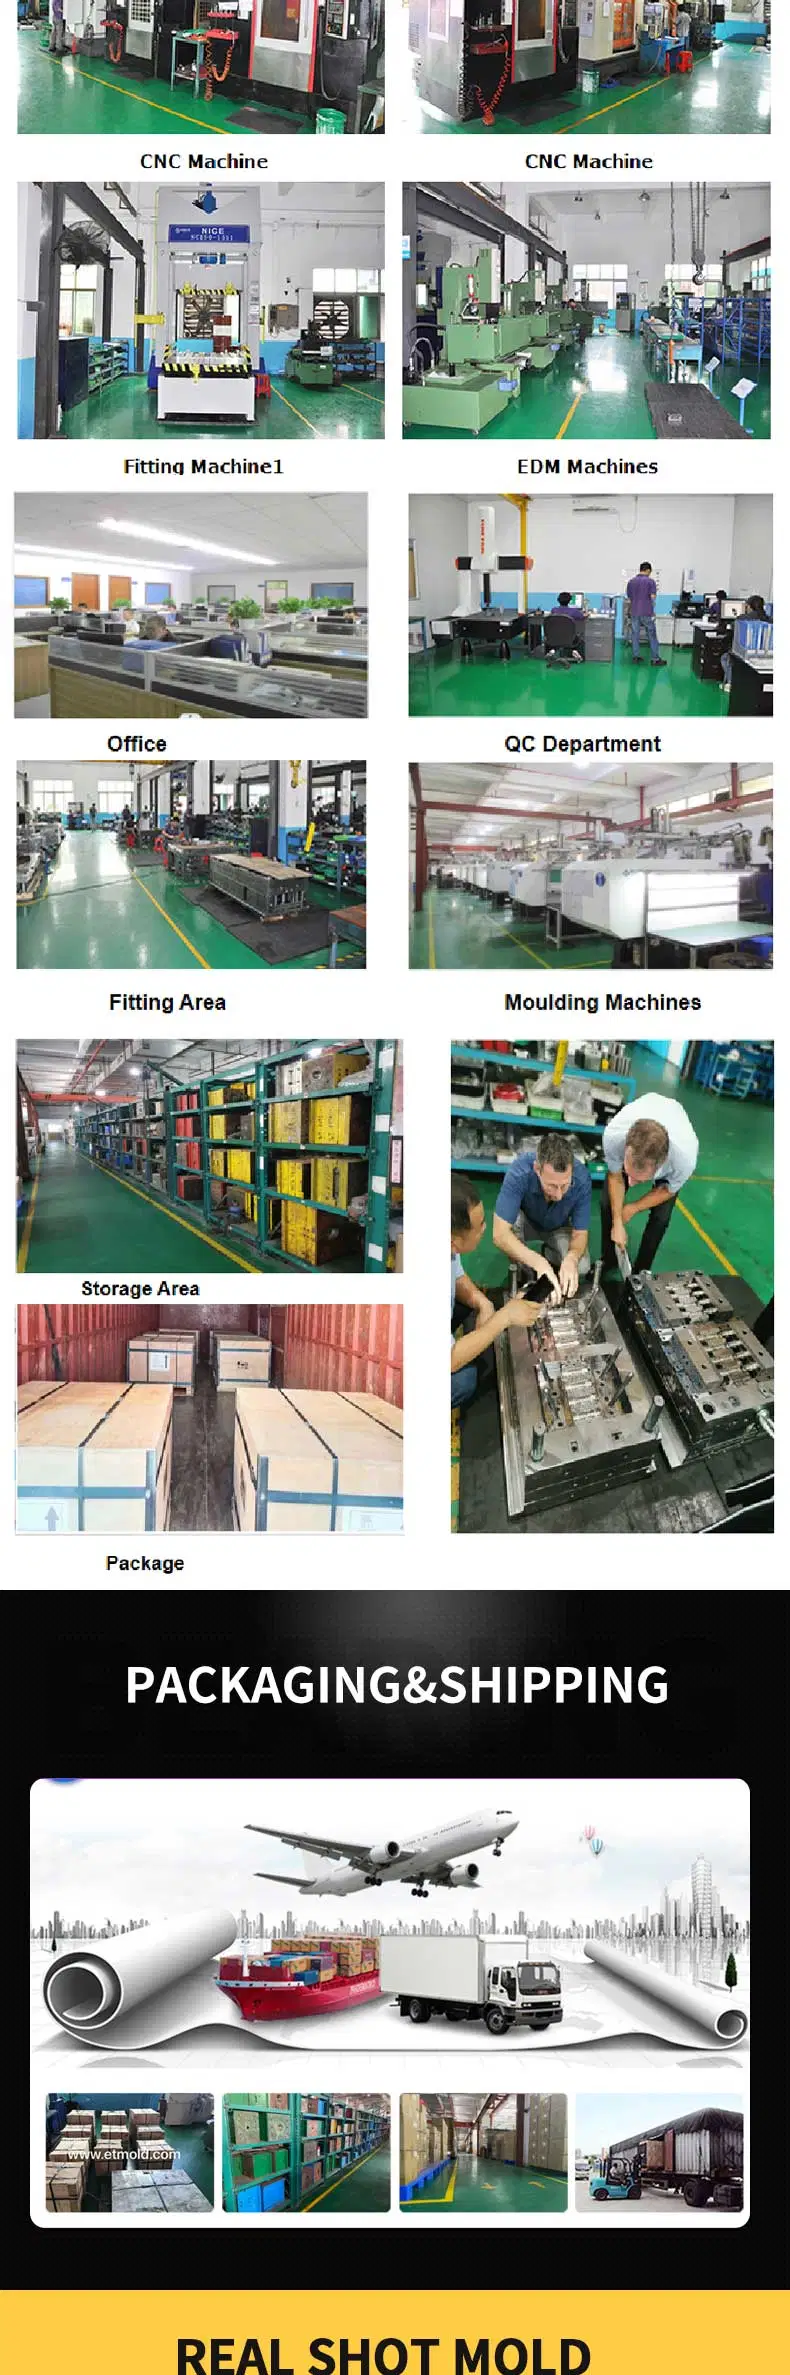 Plastic Mold Injection Service Automotive Injection Molding Products Production ABS Shell Injection Mold